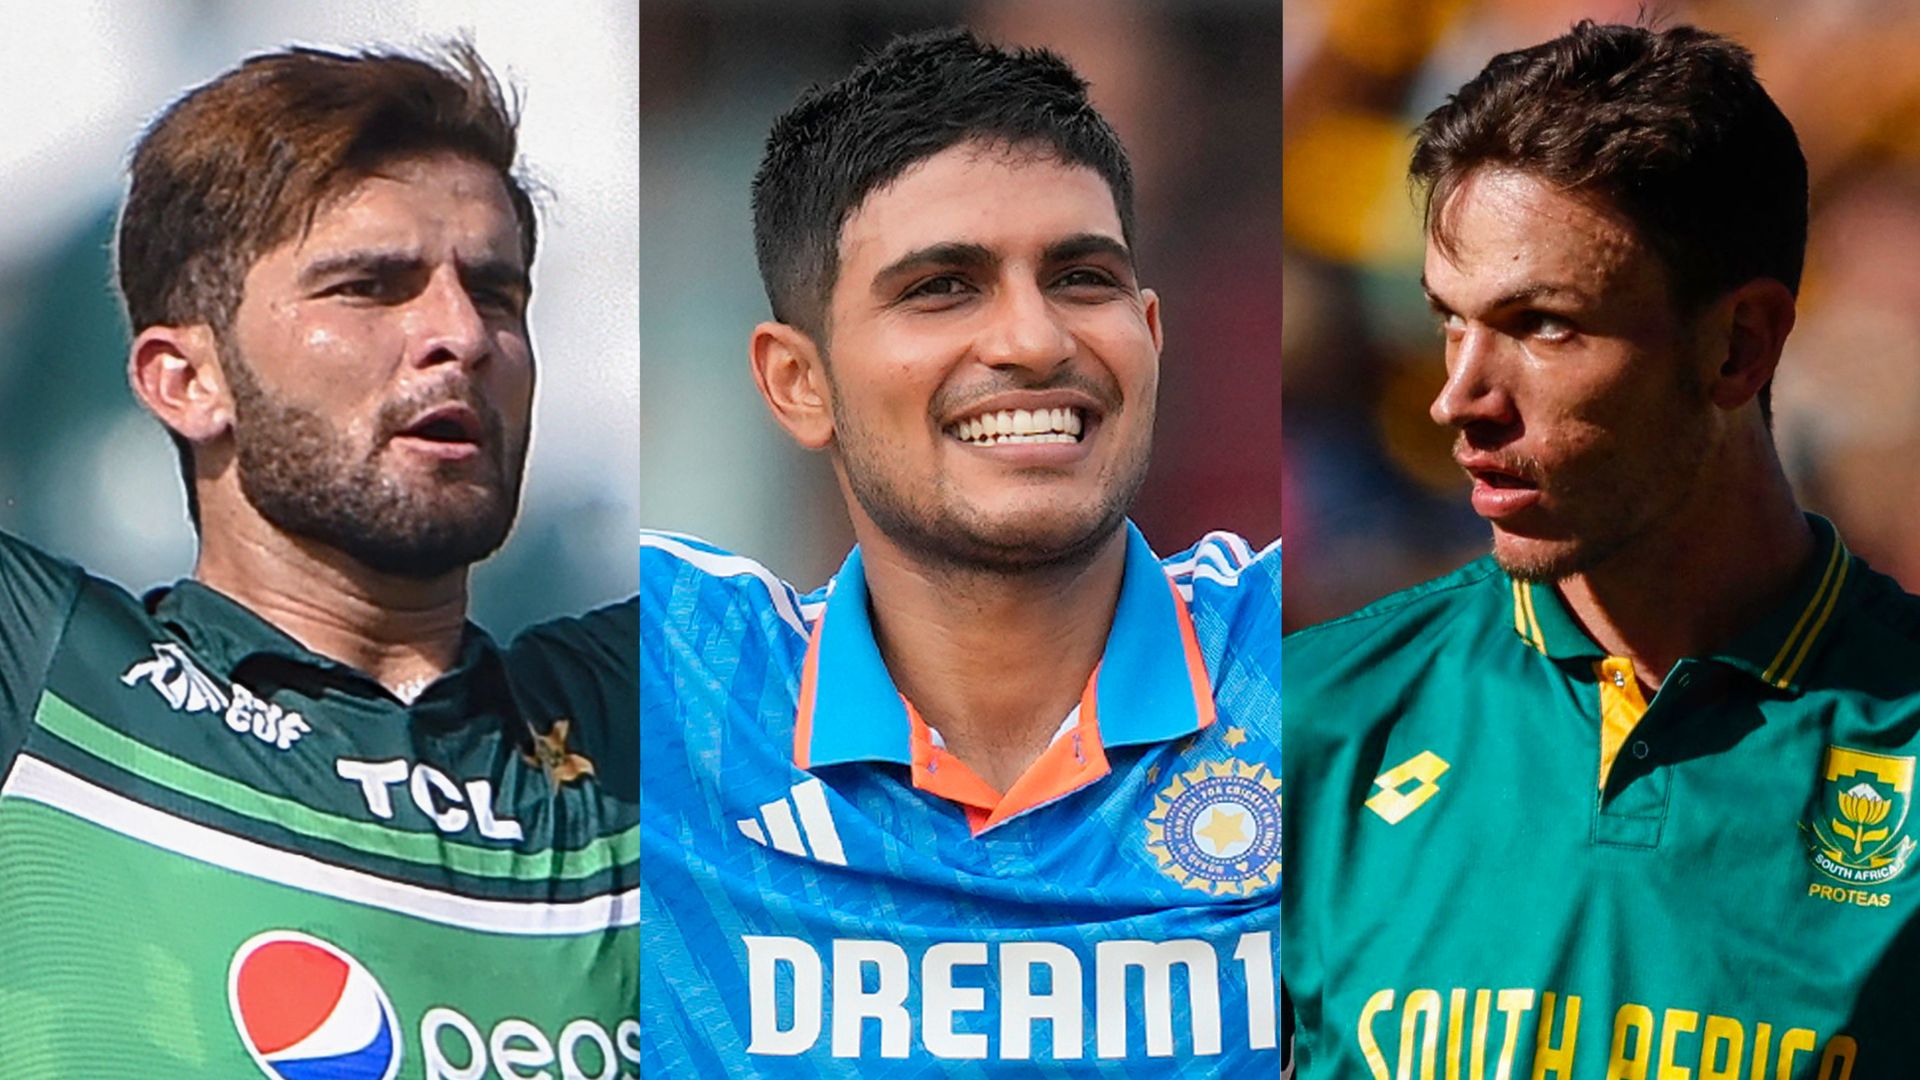 The under 25s who could thrive at Cricket World Cup